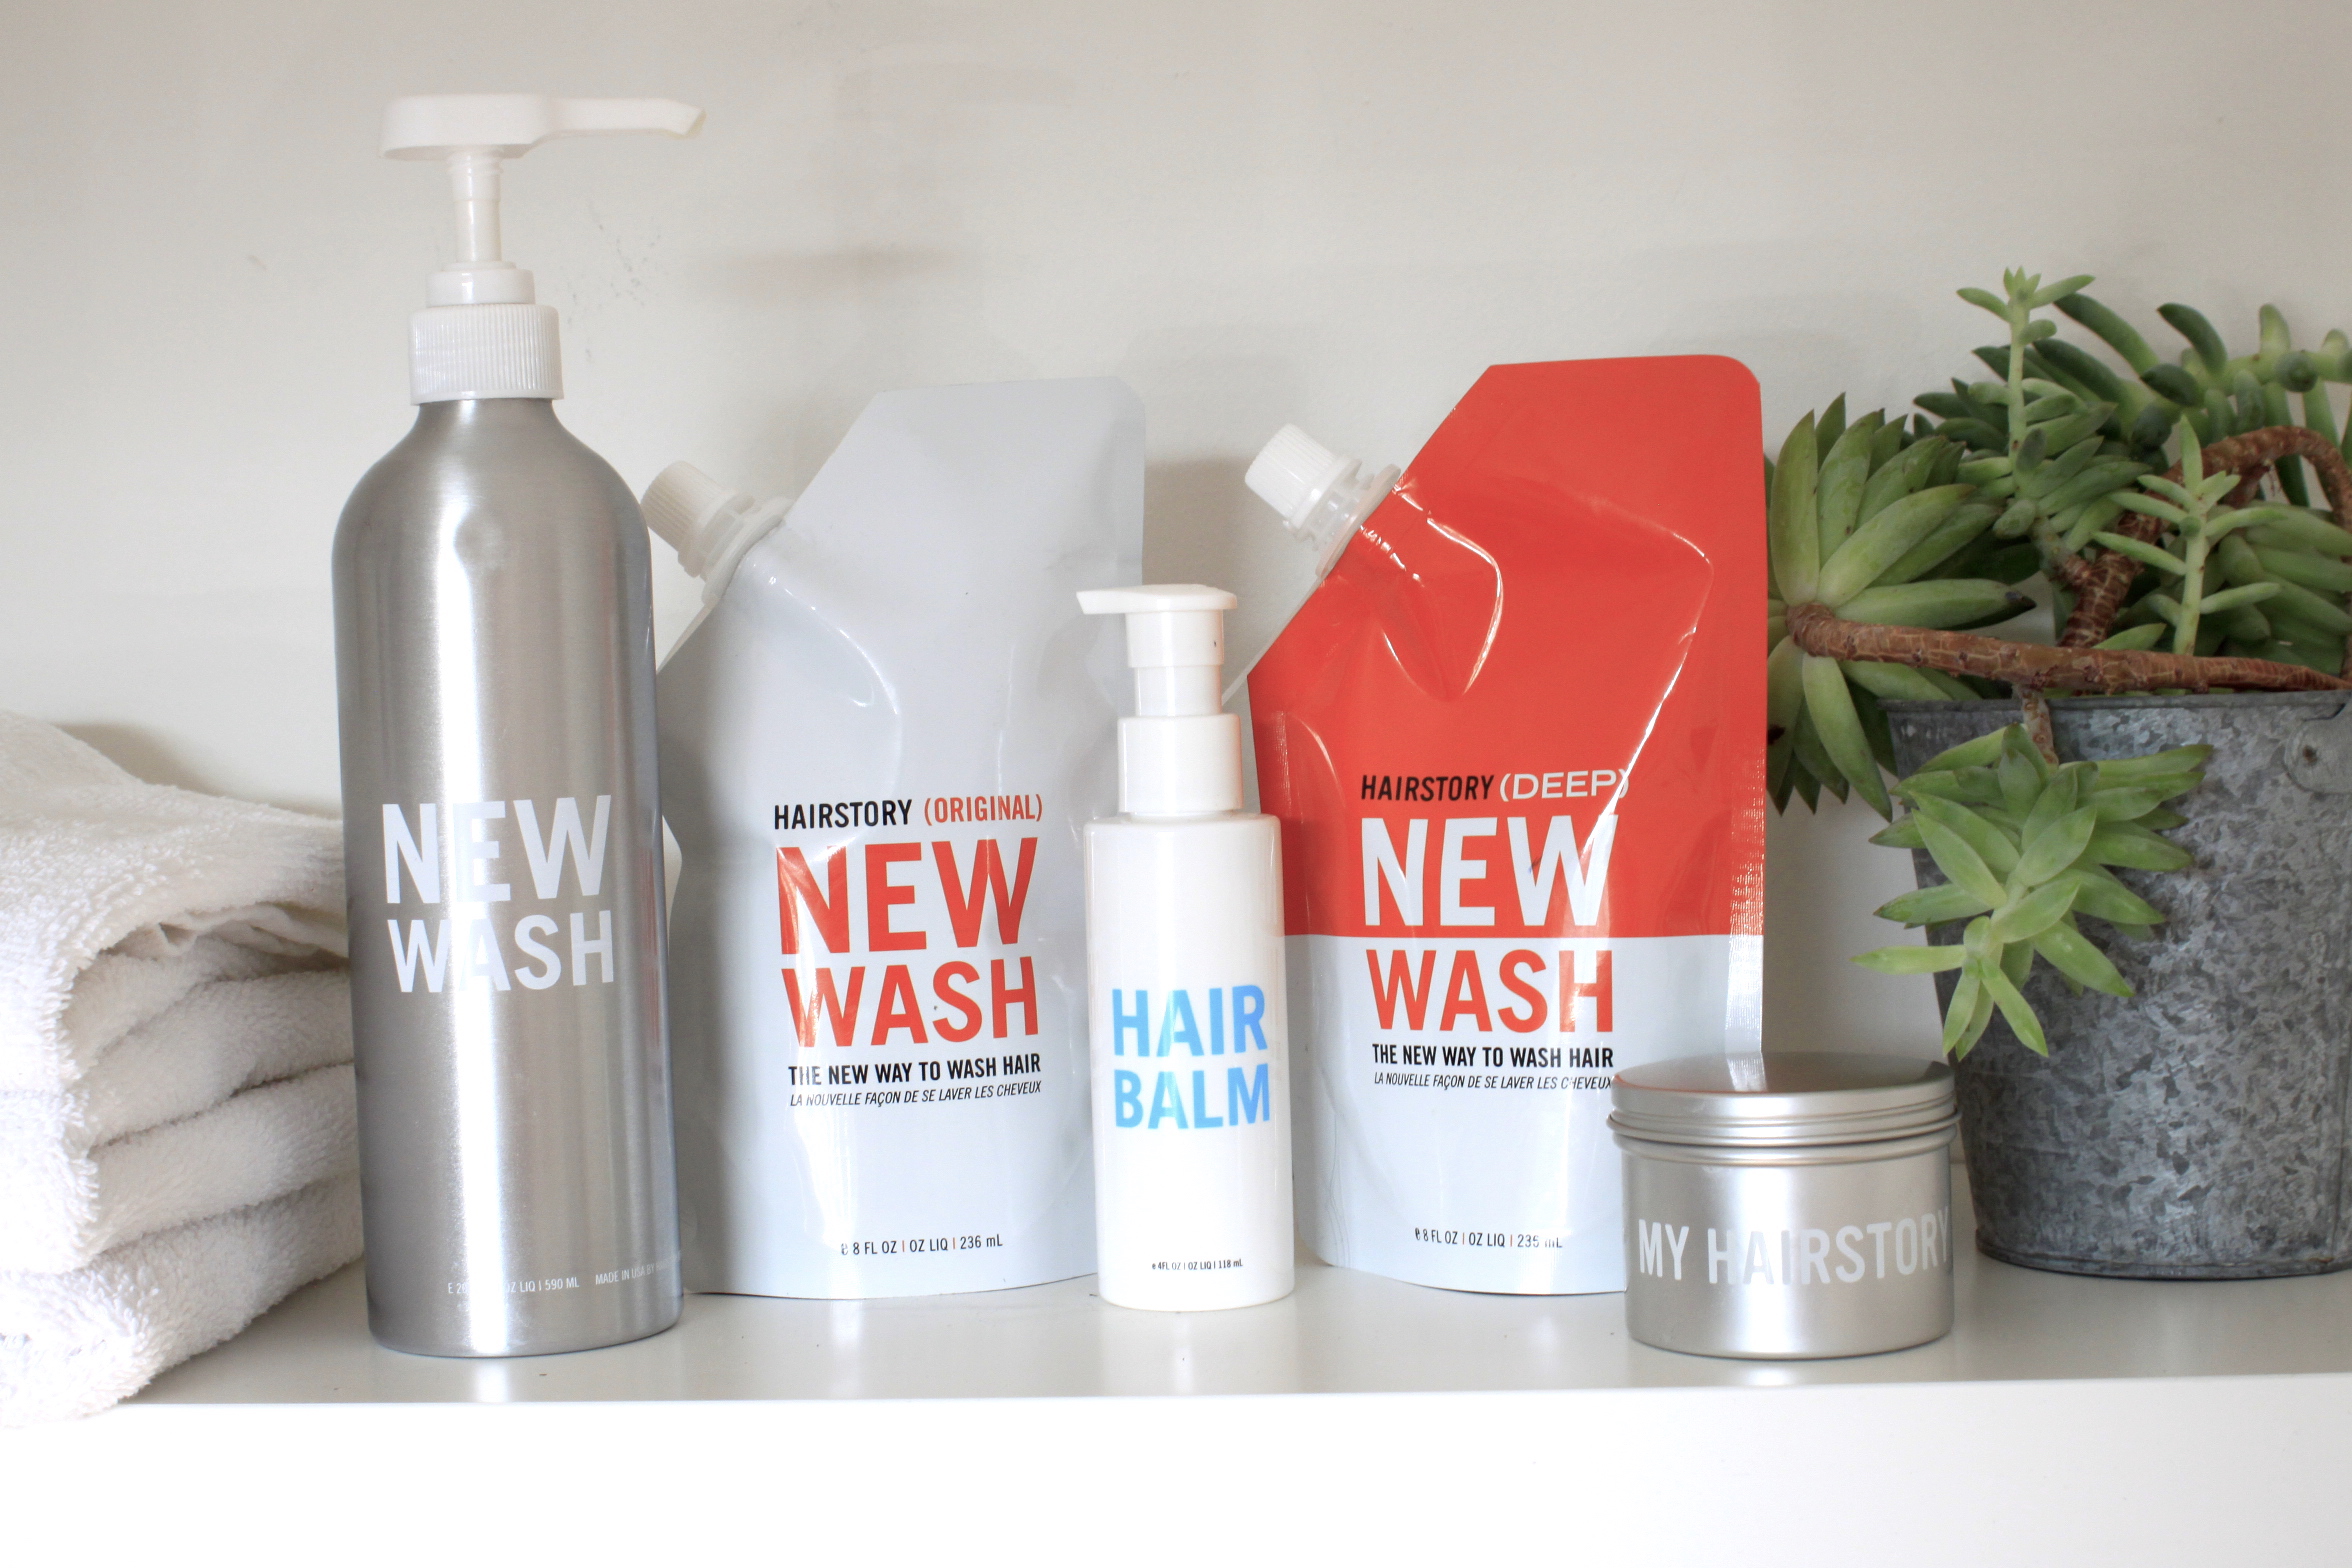 My experience with Hairstory’s New Wash - Lucky Attitude